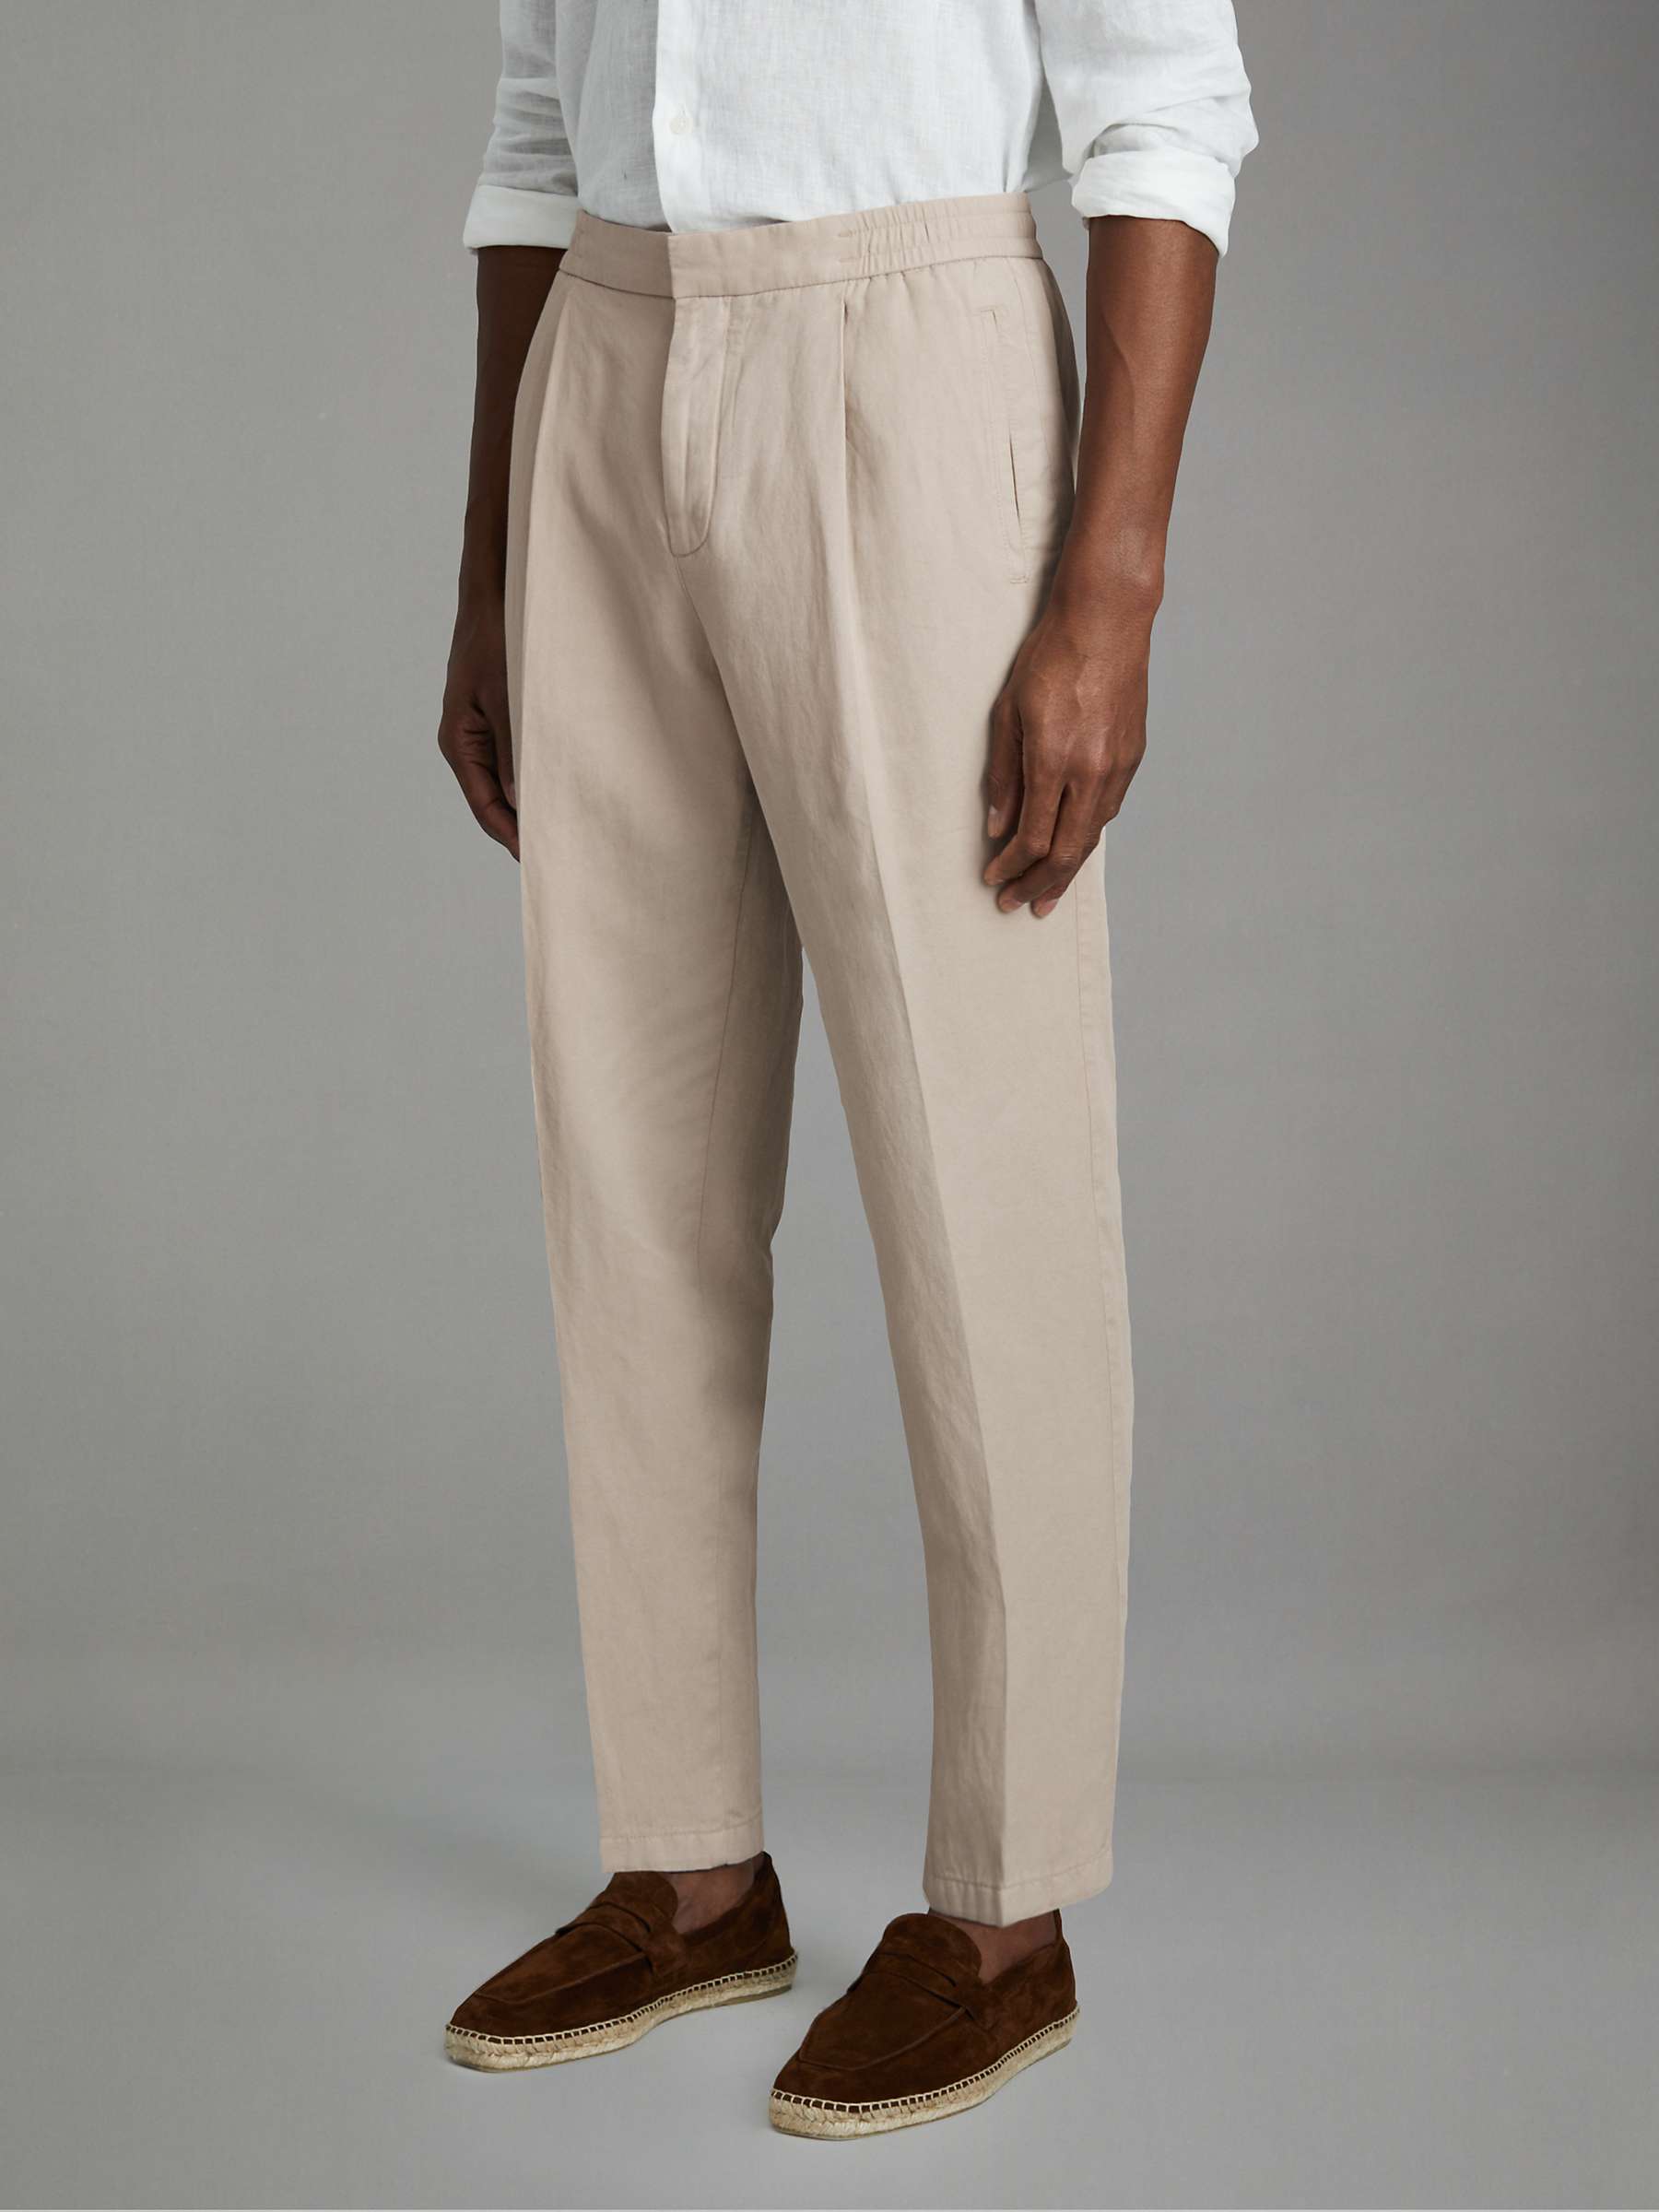 Buy Reiss Pact Linen Blend Trousers Online at johnlewis.com